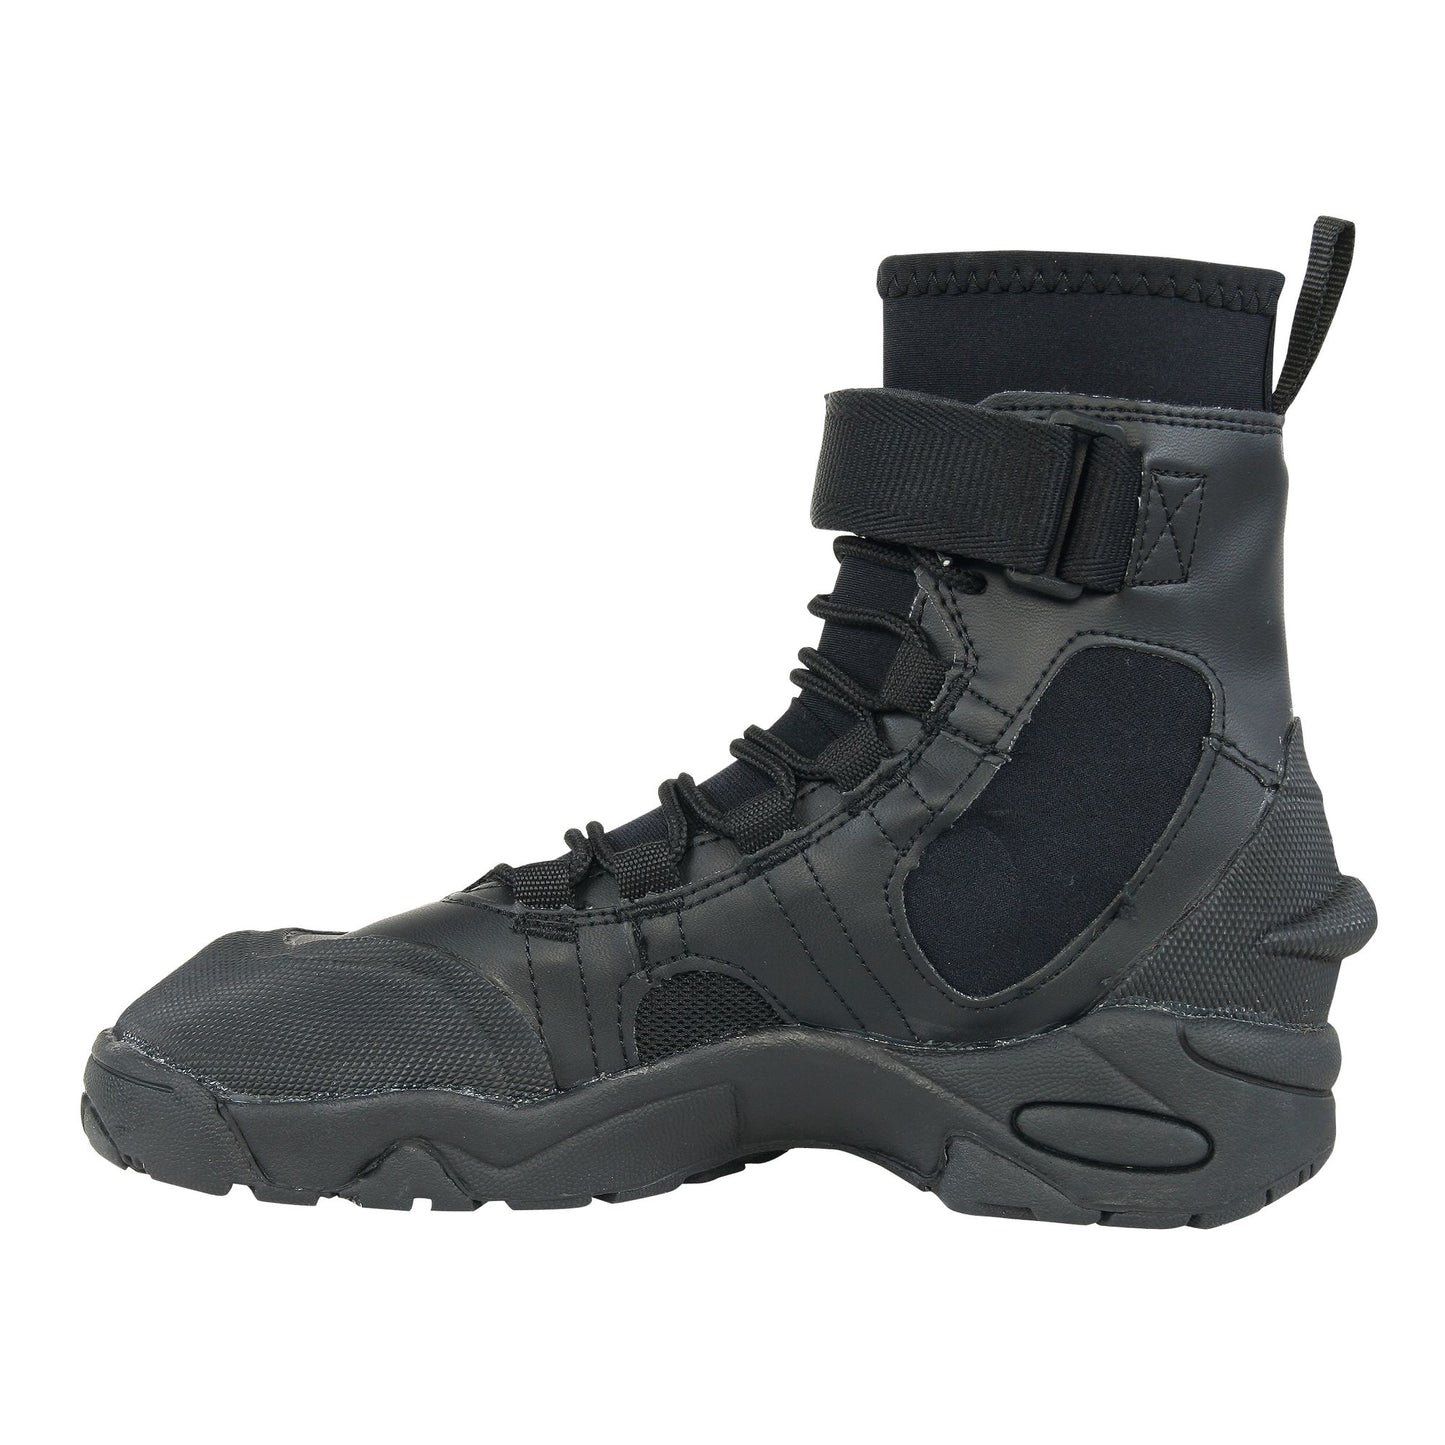 NRS Workboot Wetshoes (Old Style Closeout)